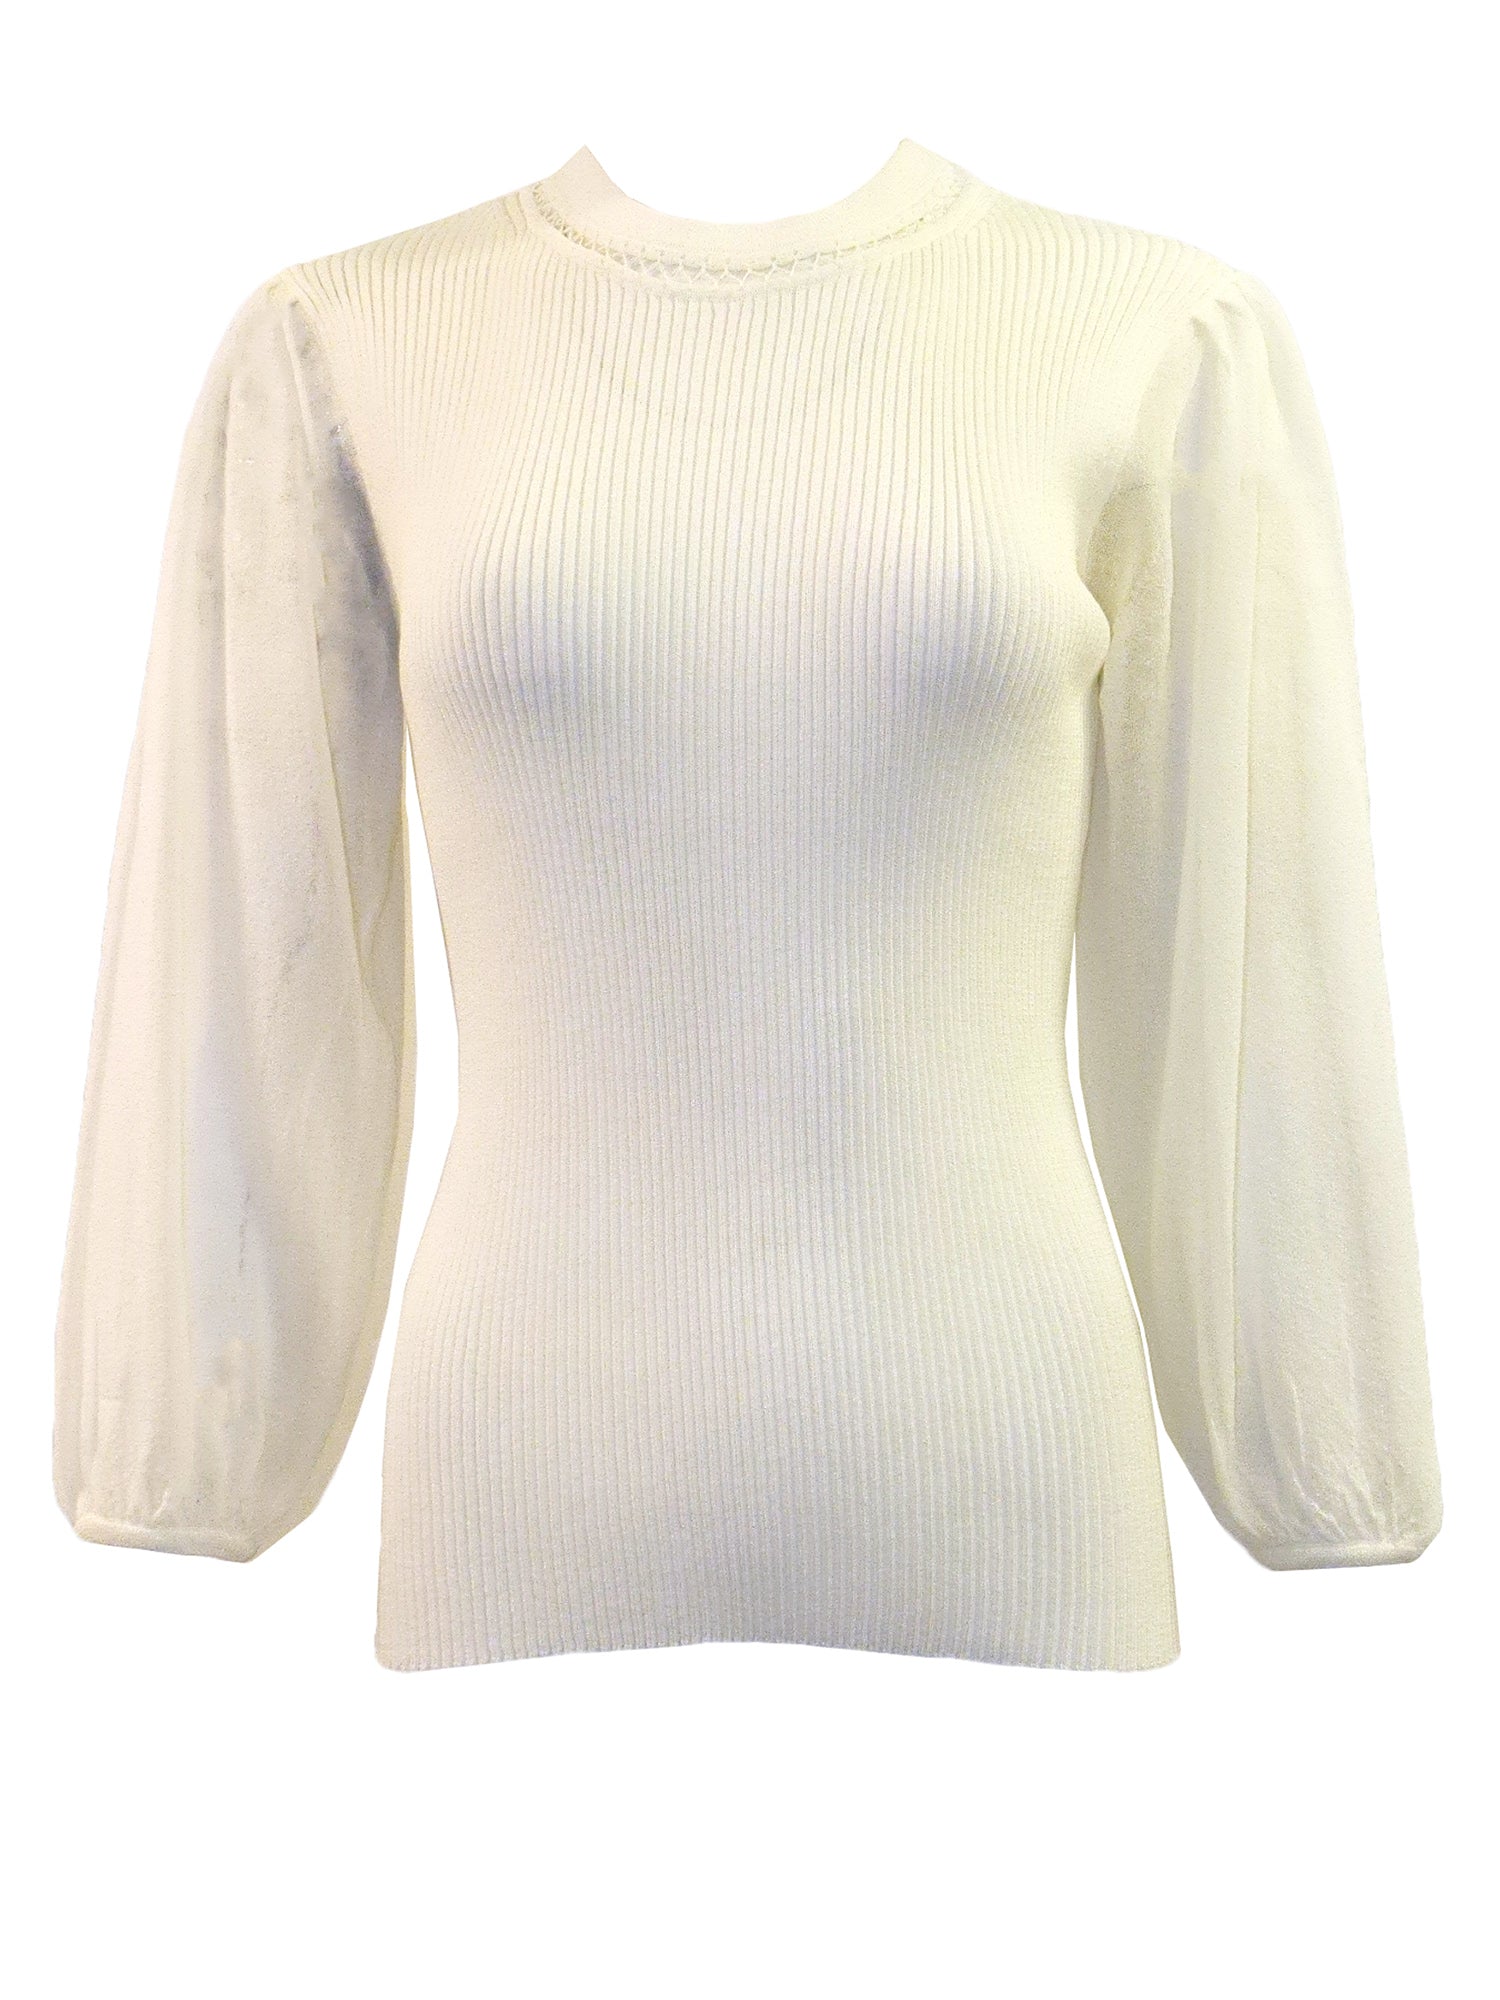 Vogue Design Ribbed Puff Sleeve Top - Tops